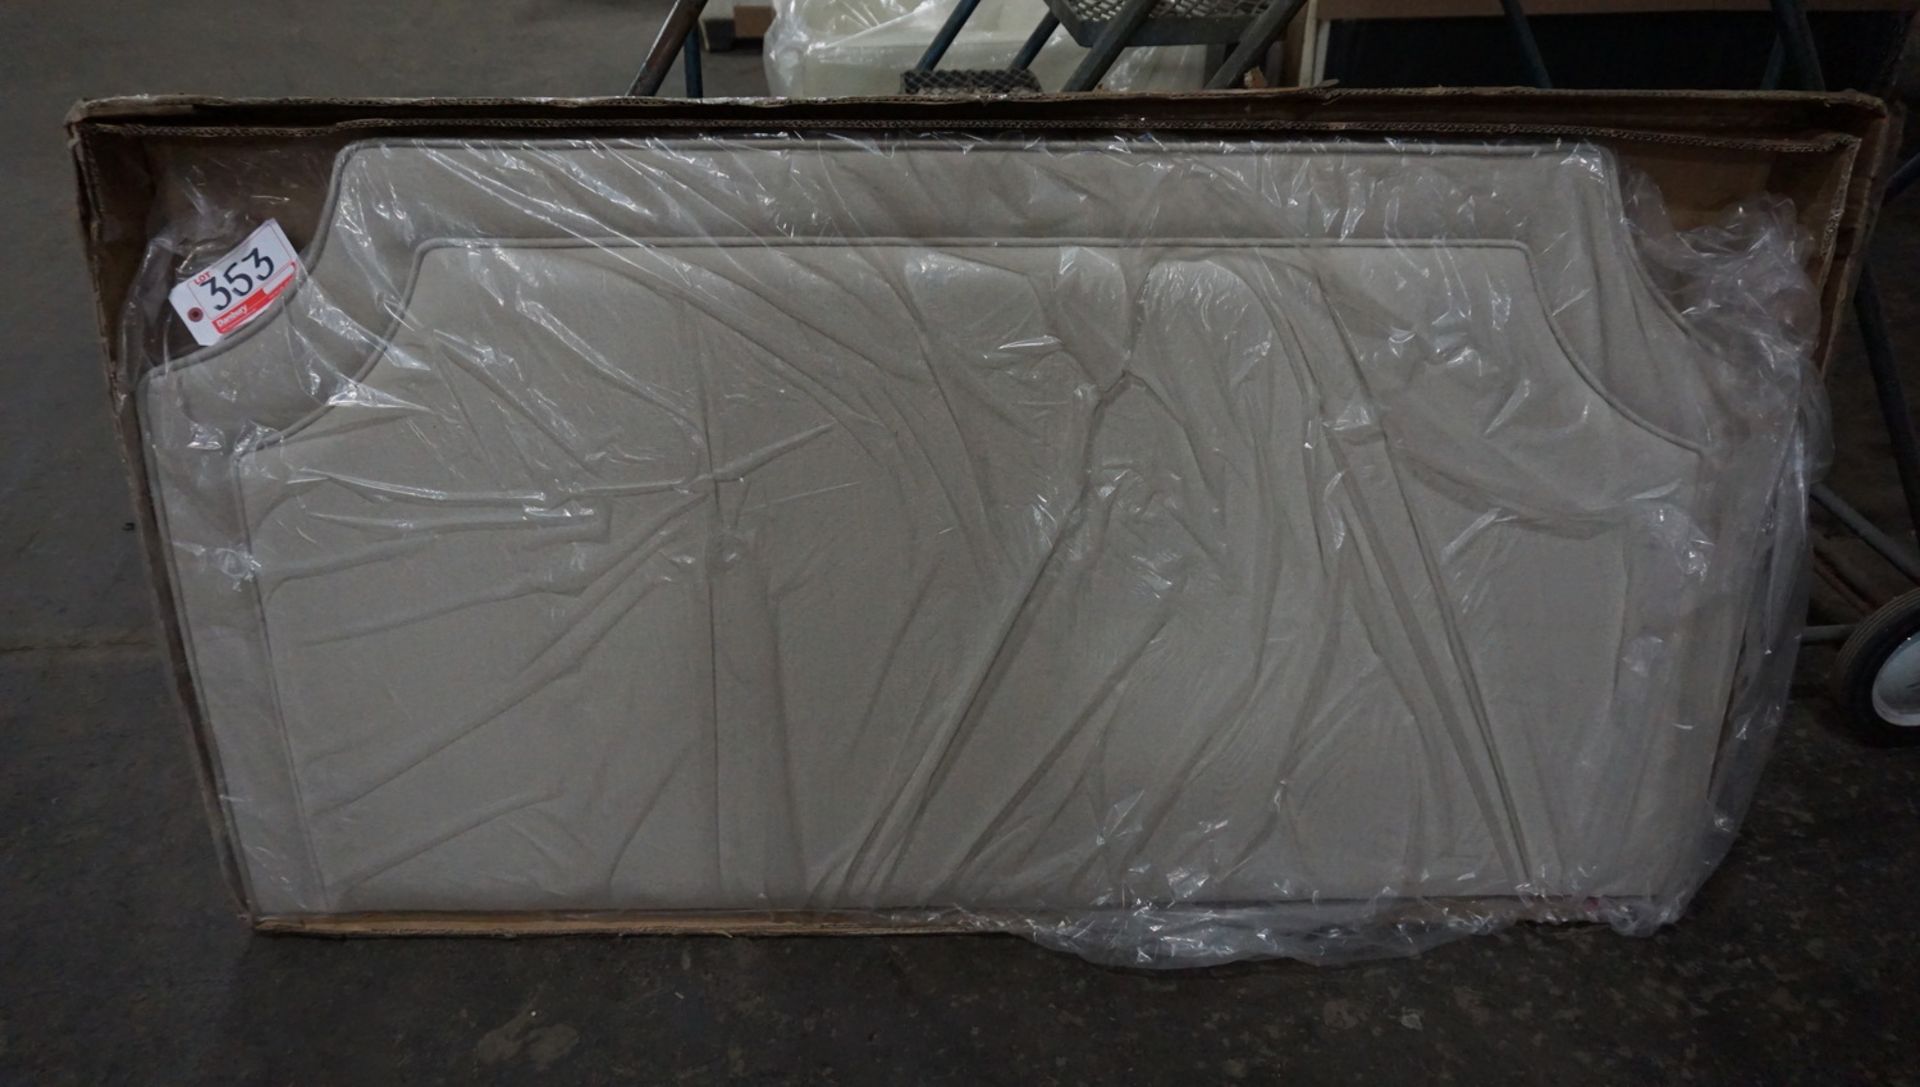 BEIGHE FABRIC UPHOLSTERED HEADBOARD W/ MOUNT - Image 2 of 2